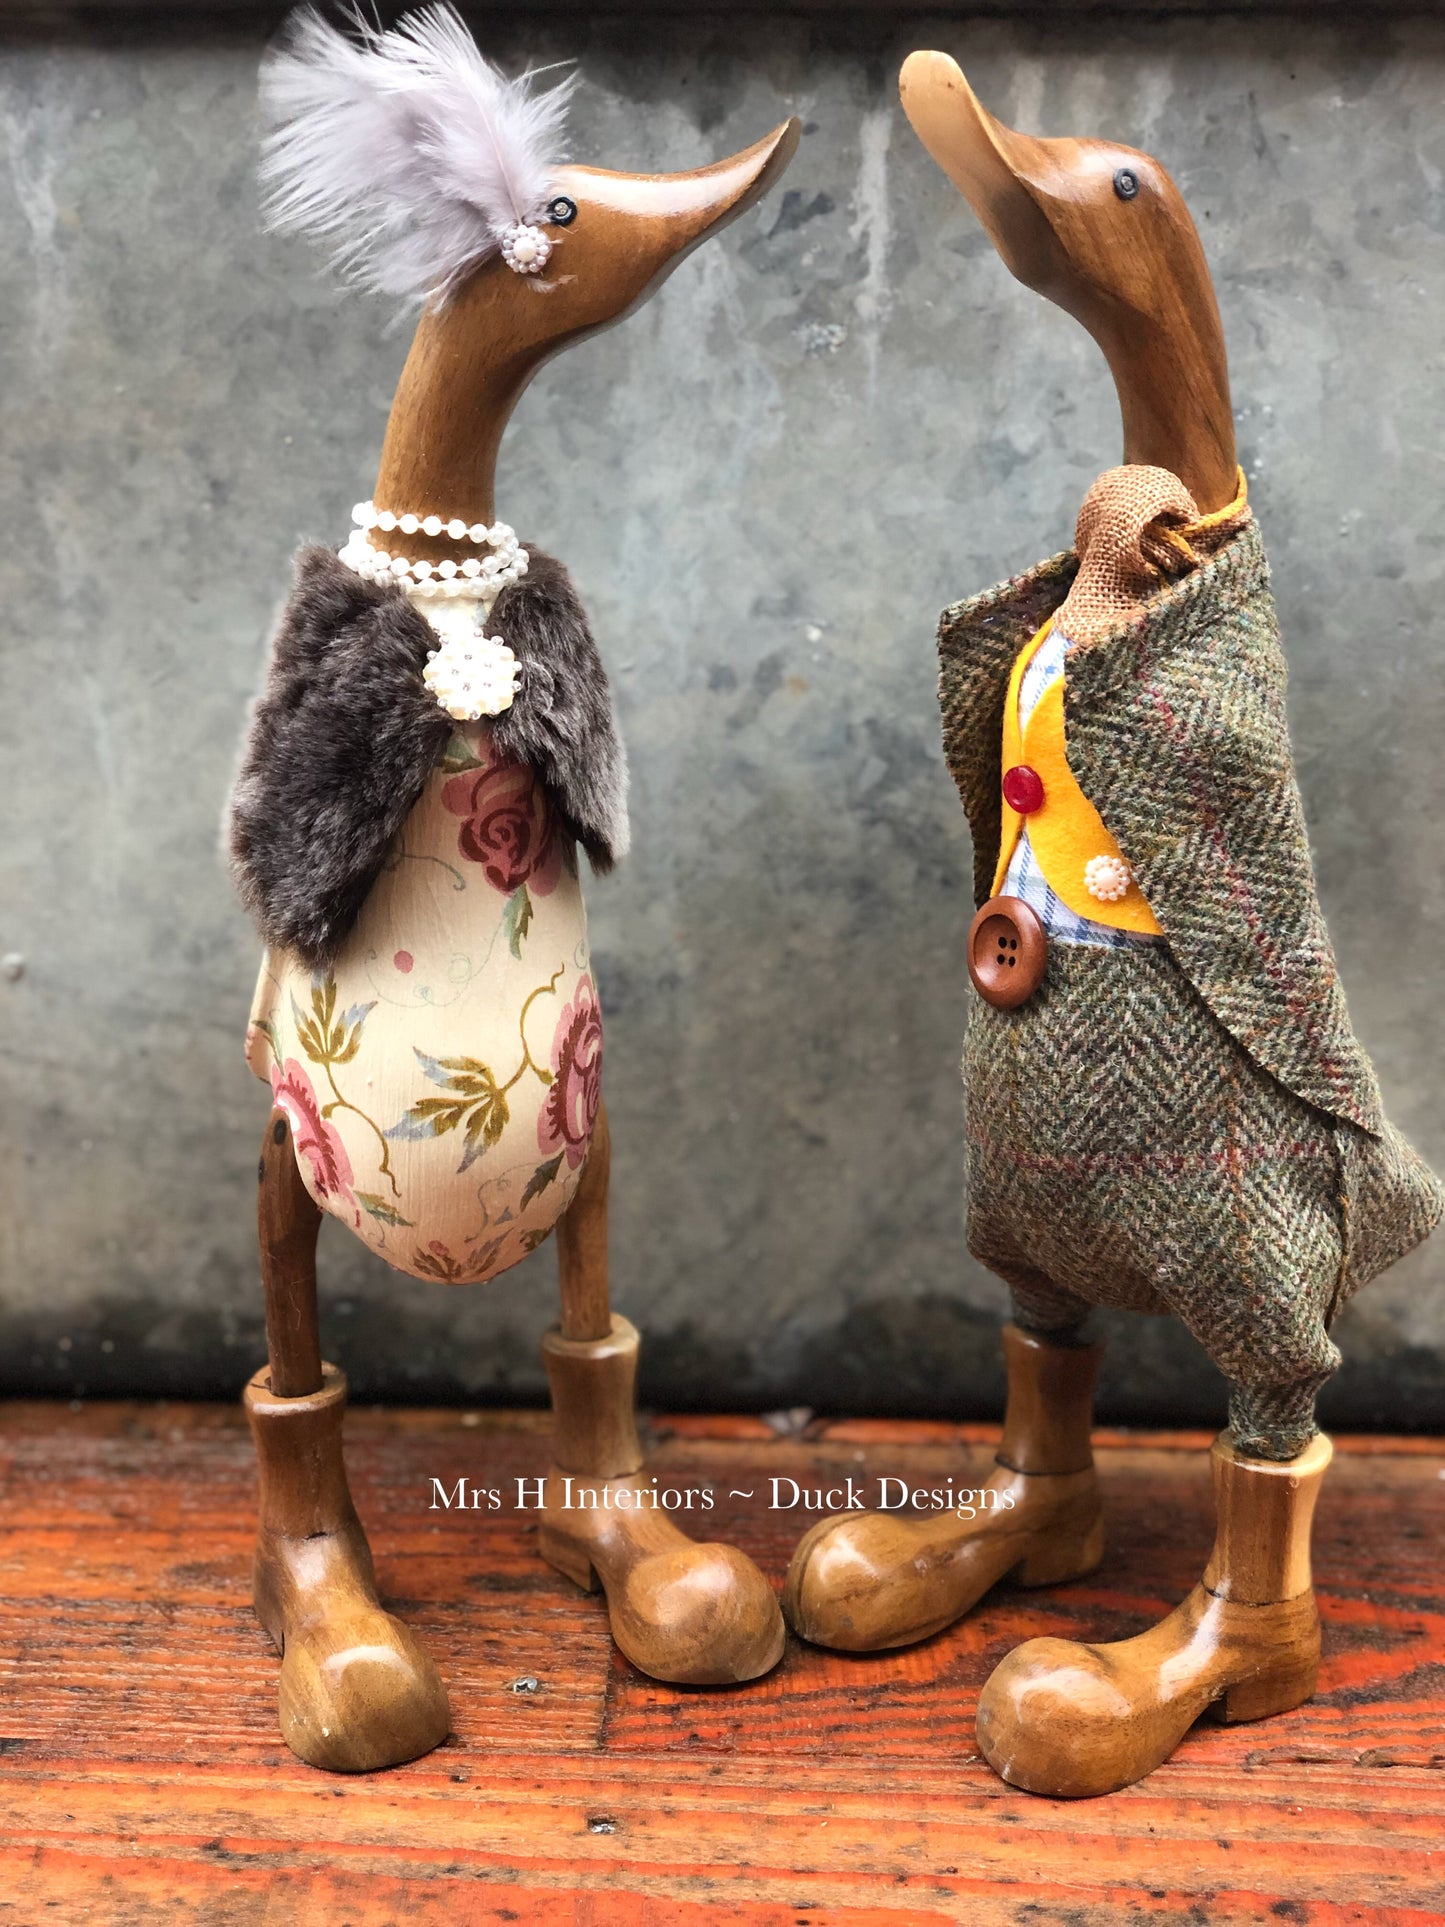 Granny and Grandpa Ducks - Quintessentially British Decorated Wooden Duck in Boots by Mrs H the Duck Lady